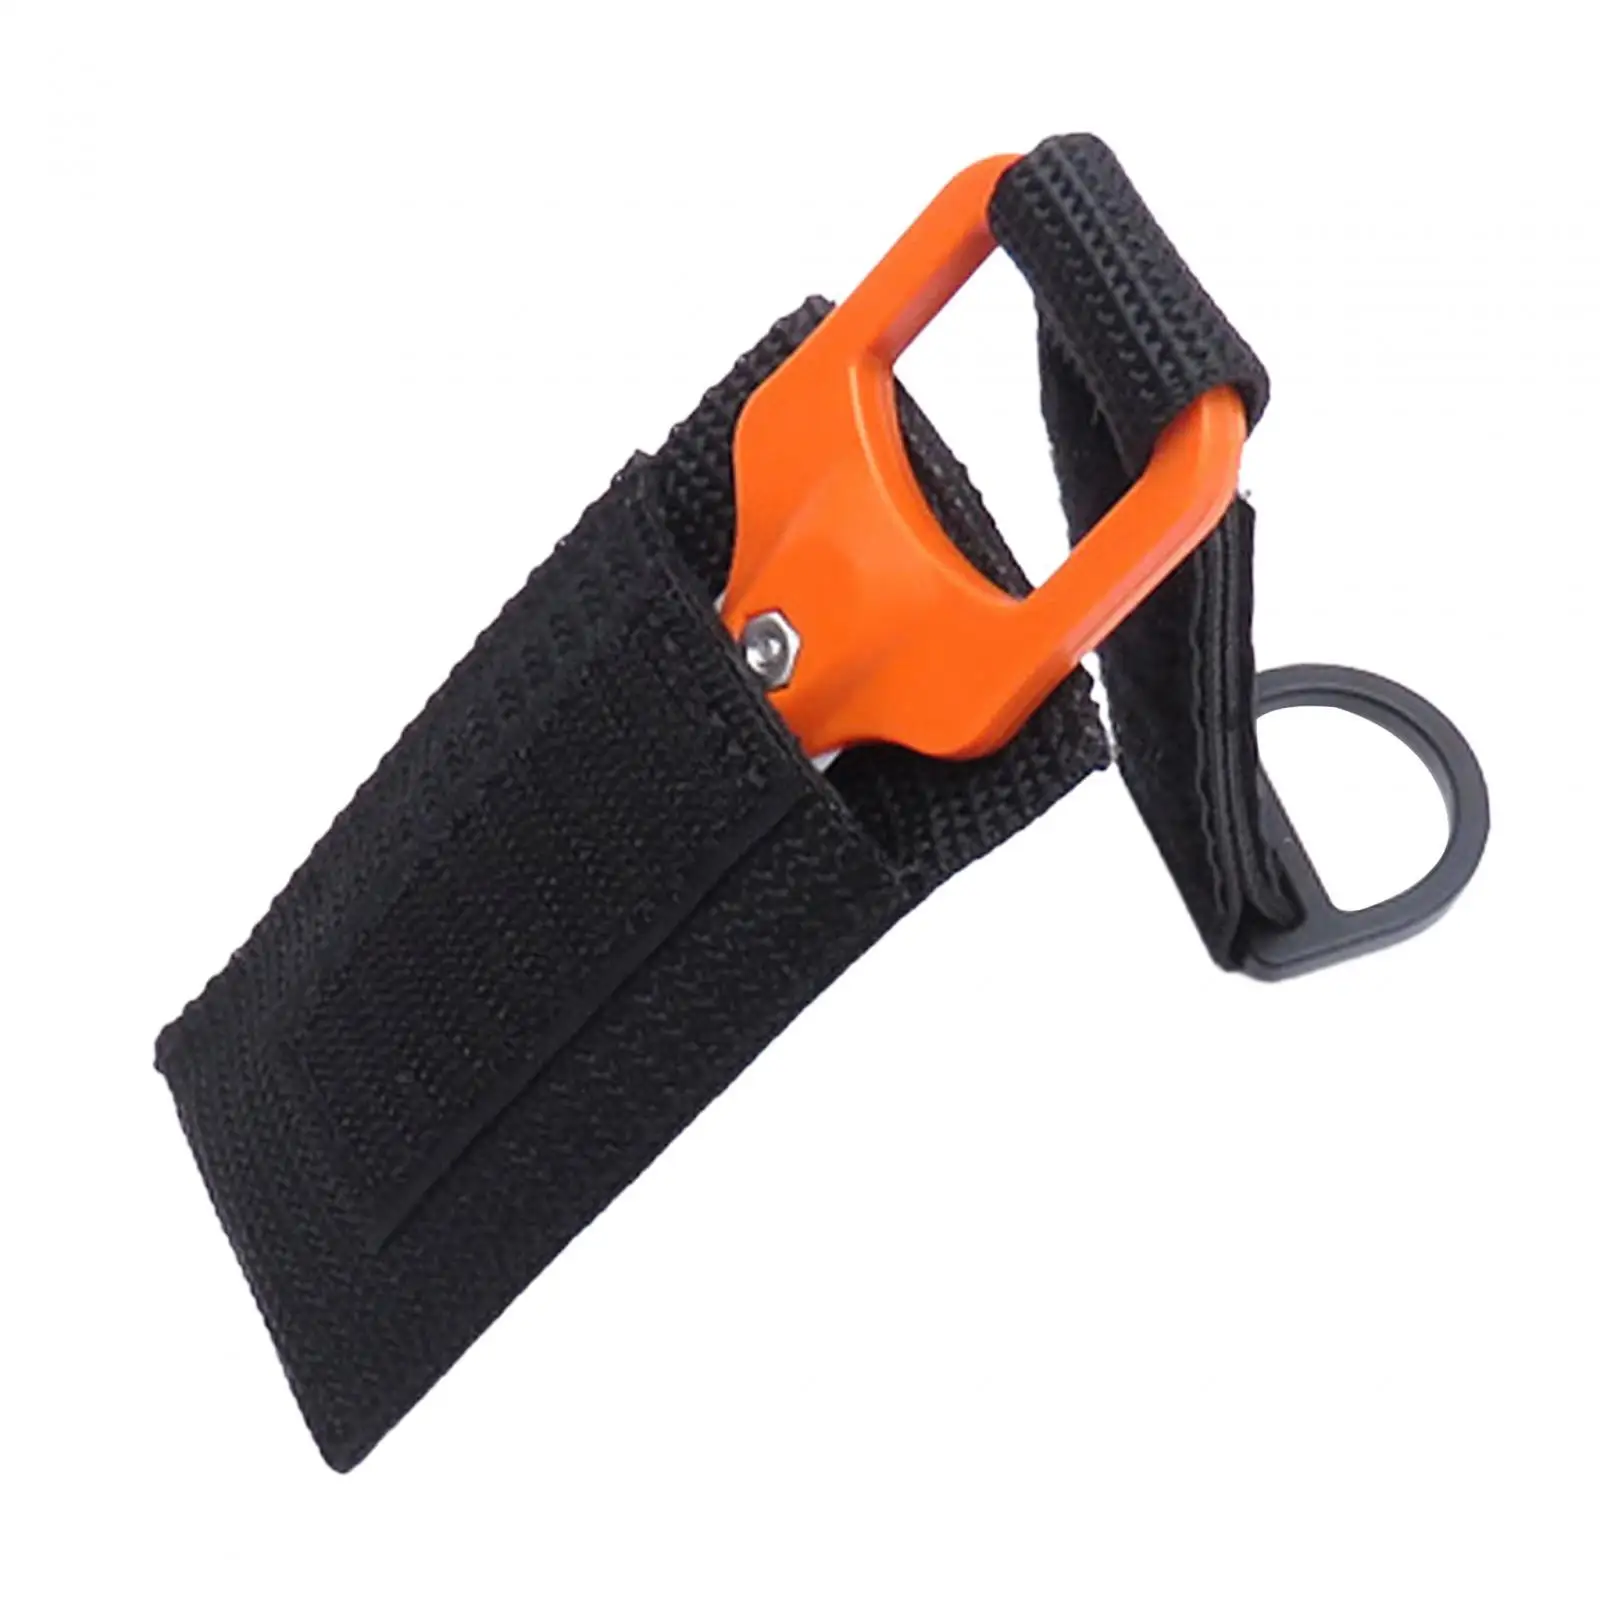 Diving Line Cutter Diver Line Cutter for Free Diving Water Sports Underwater